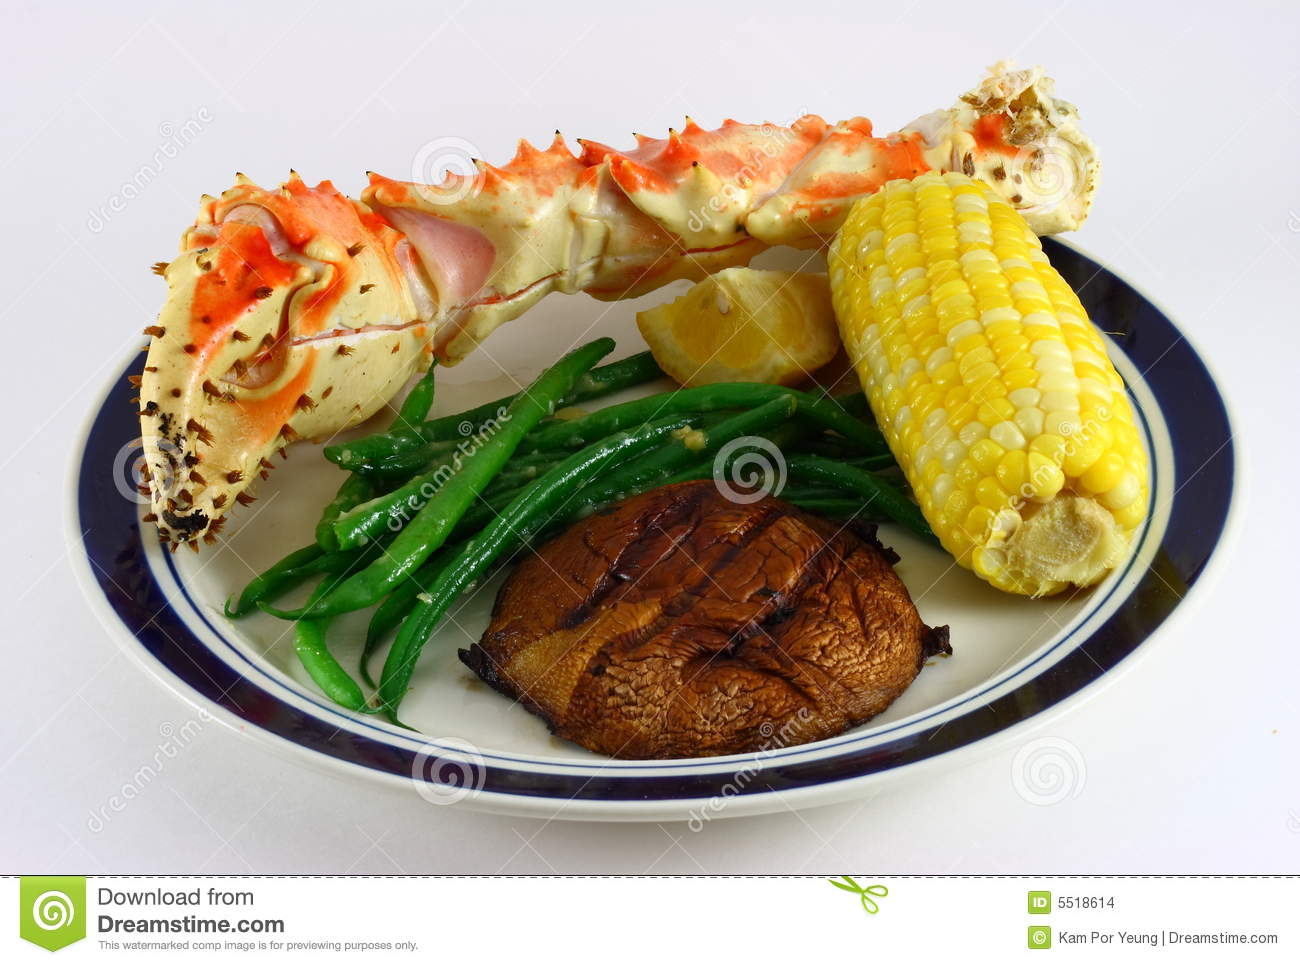     Plate With A King Crab Leg A Cob Of Corn Green Beans And A Potato